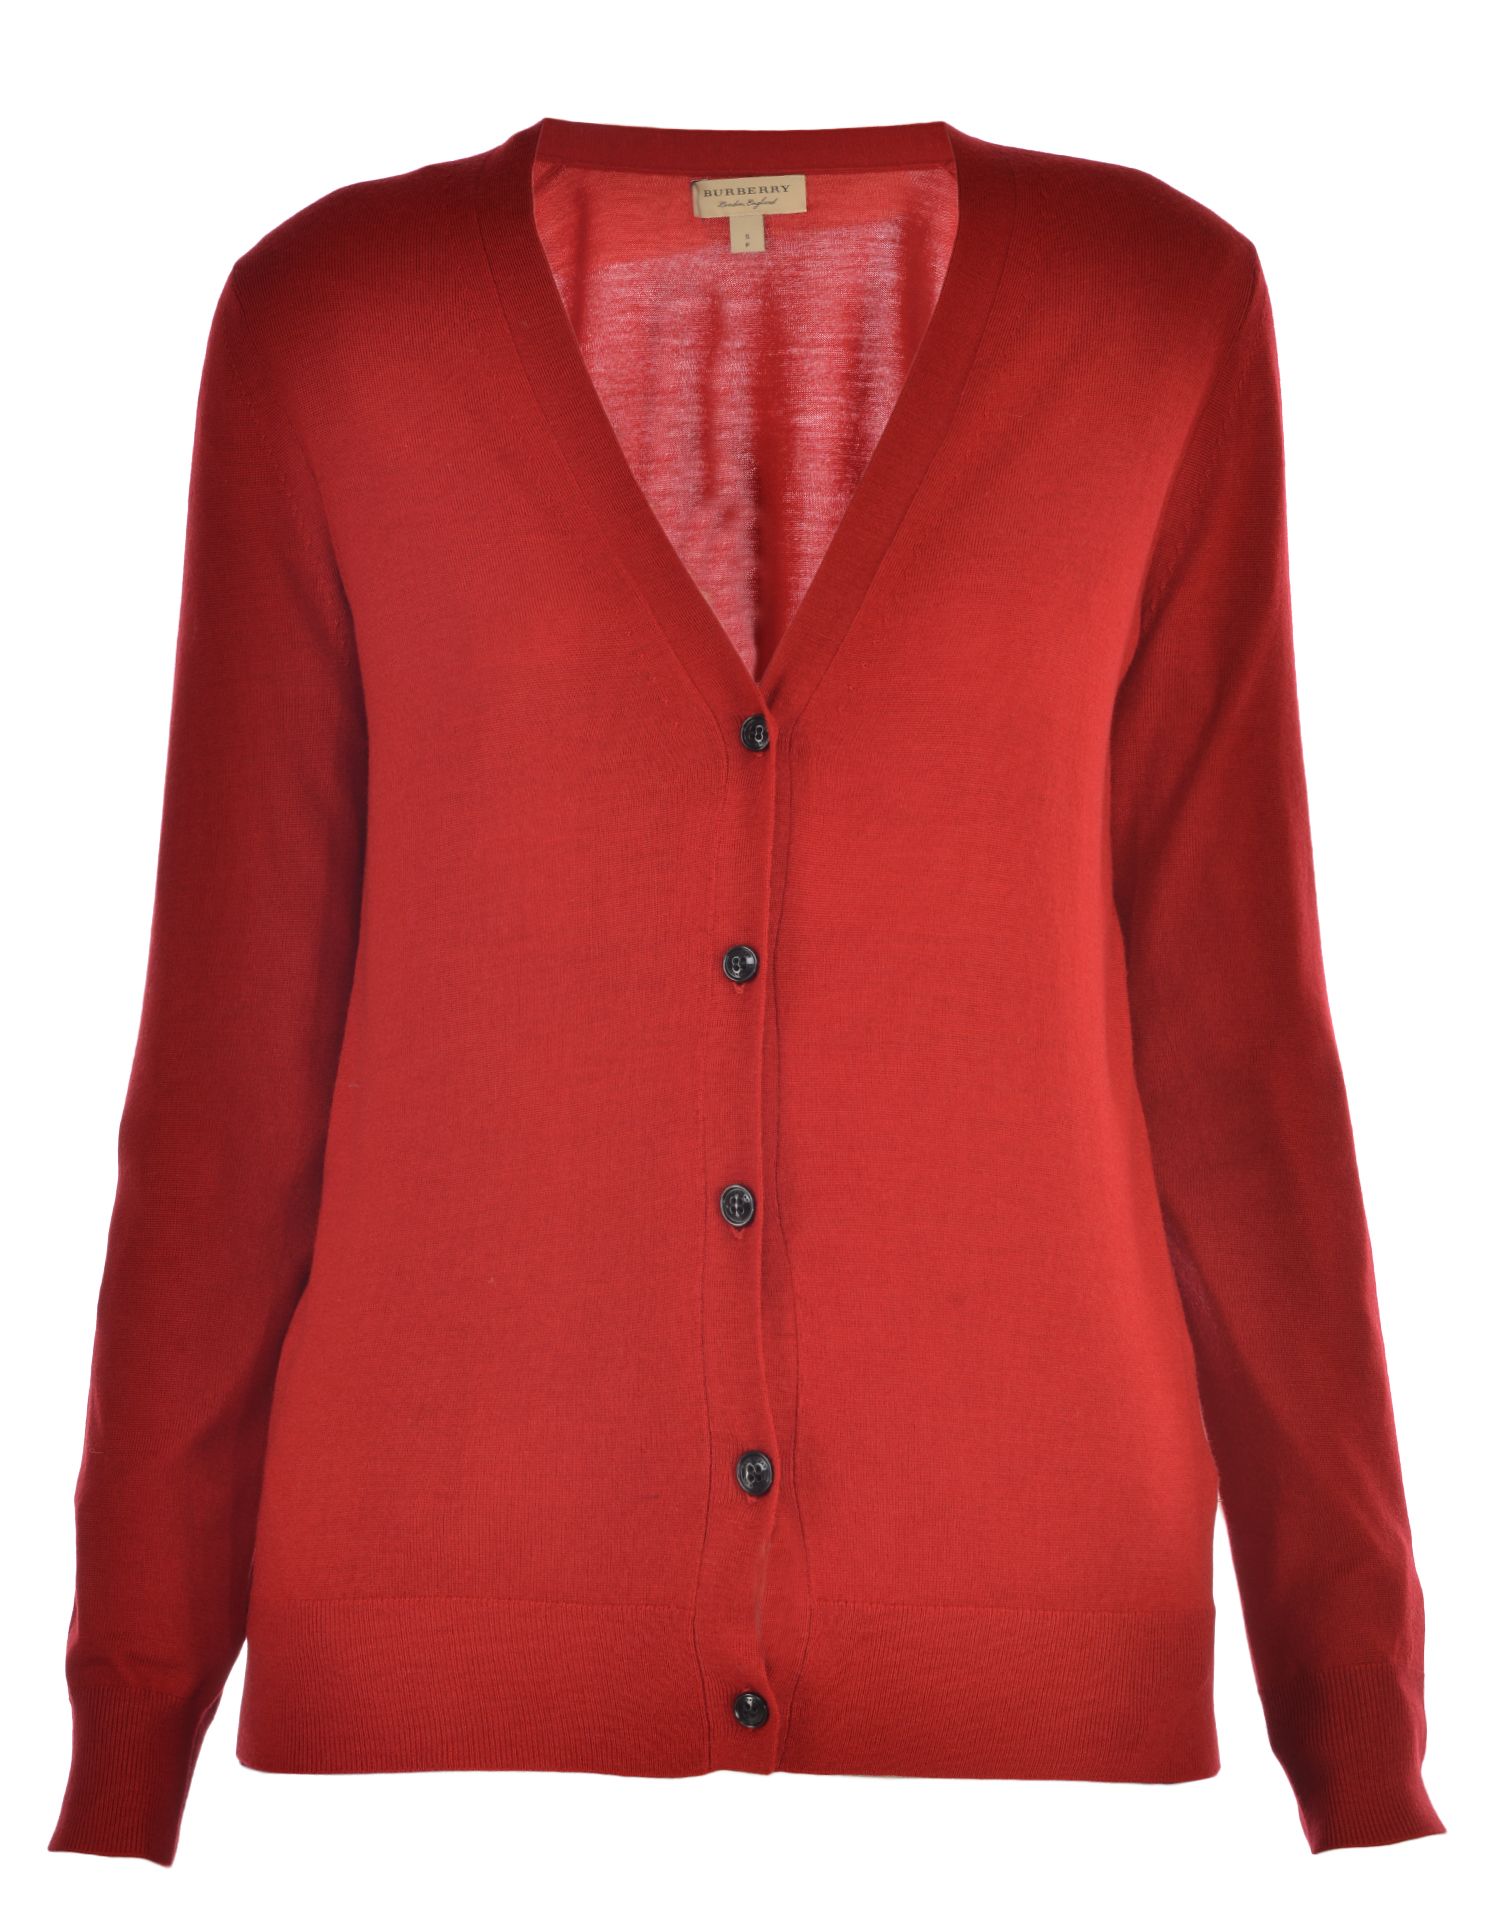 Burberry - Burberry Wool Cardigan - PARADE RED, Women's Sweaters | Italist